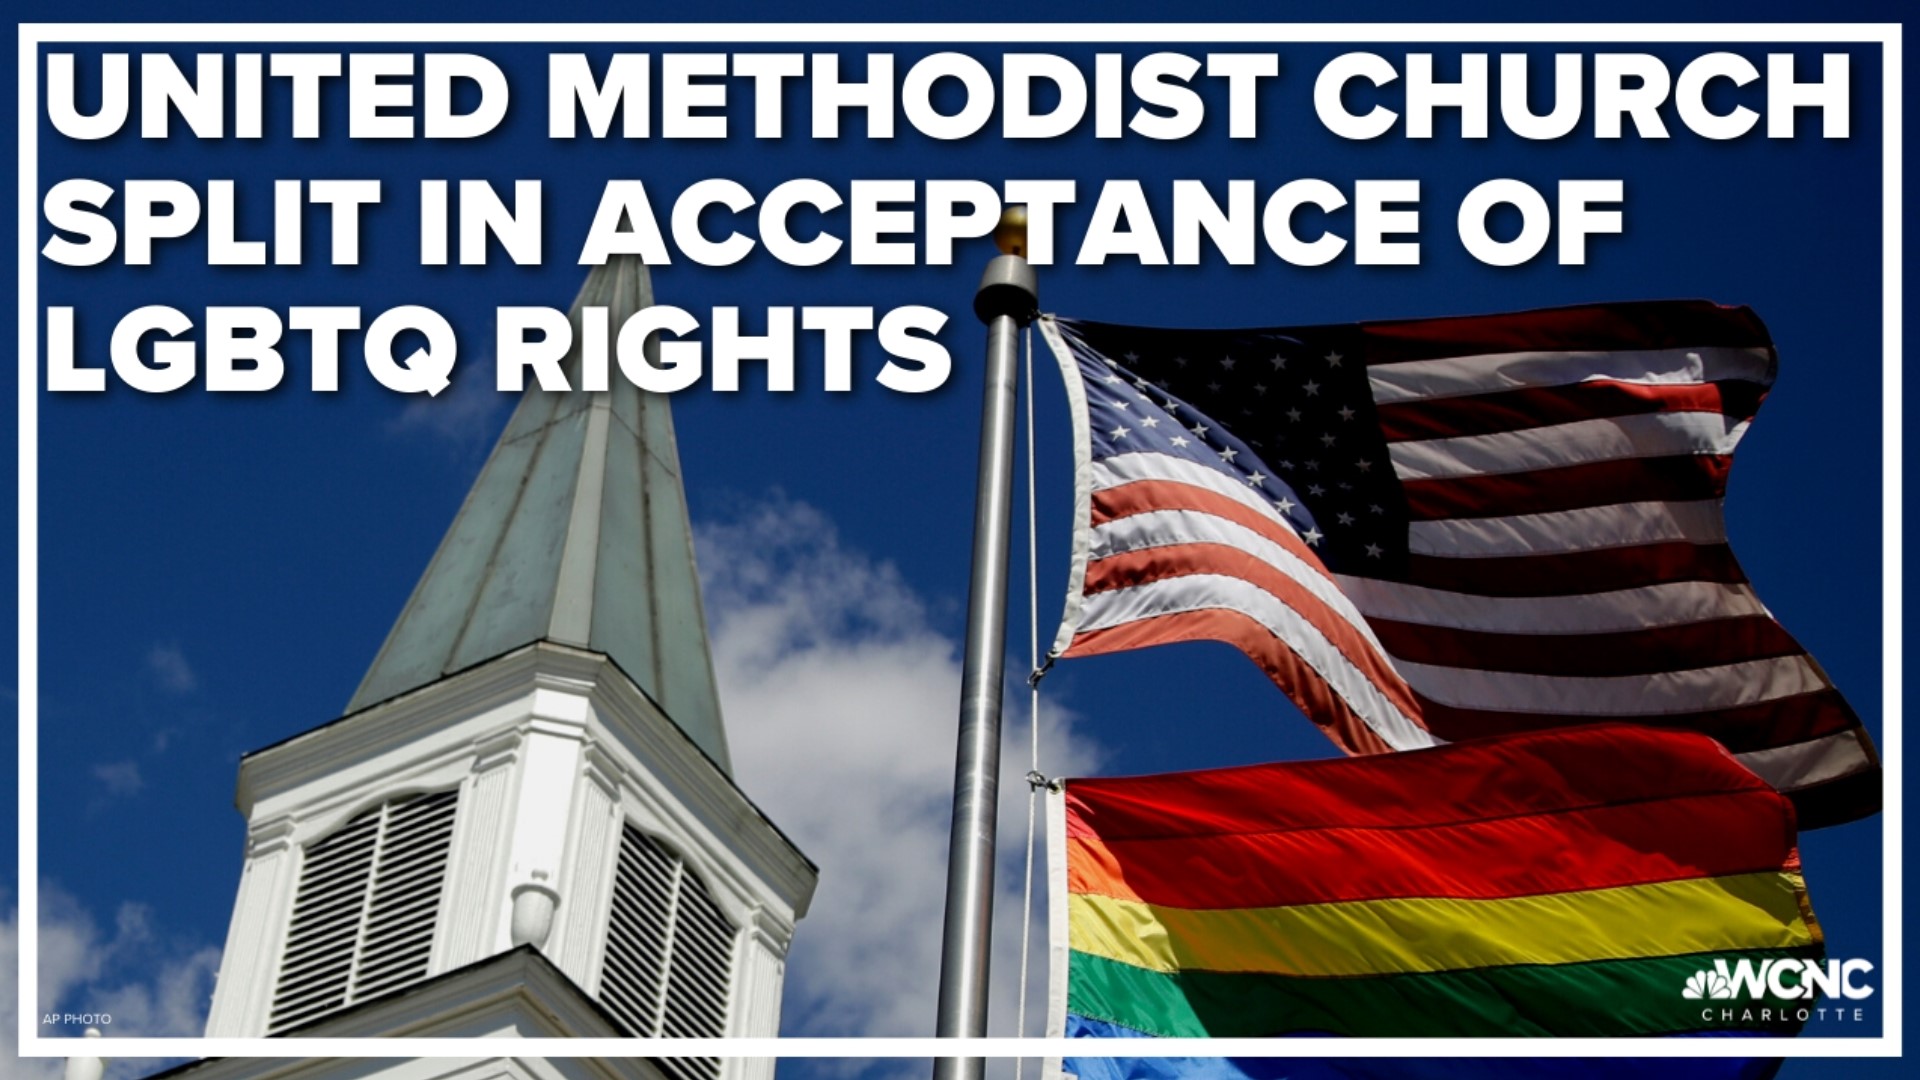 The United Methodist Church isn't feeling united recently after a difference of opinion surrounding LGBTQ acceptance within the church ultimately led to a split.